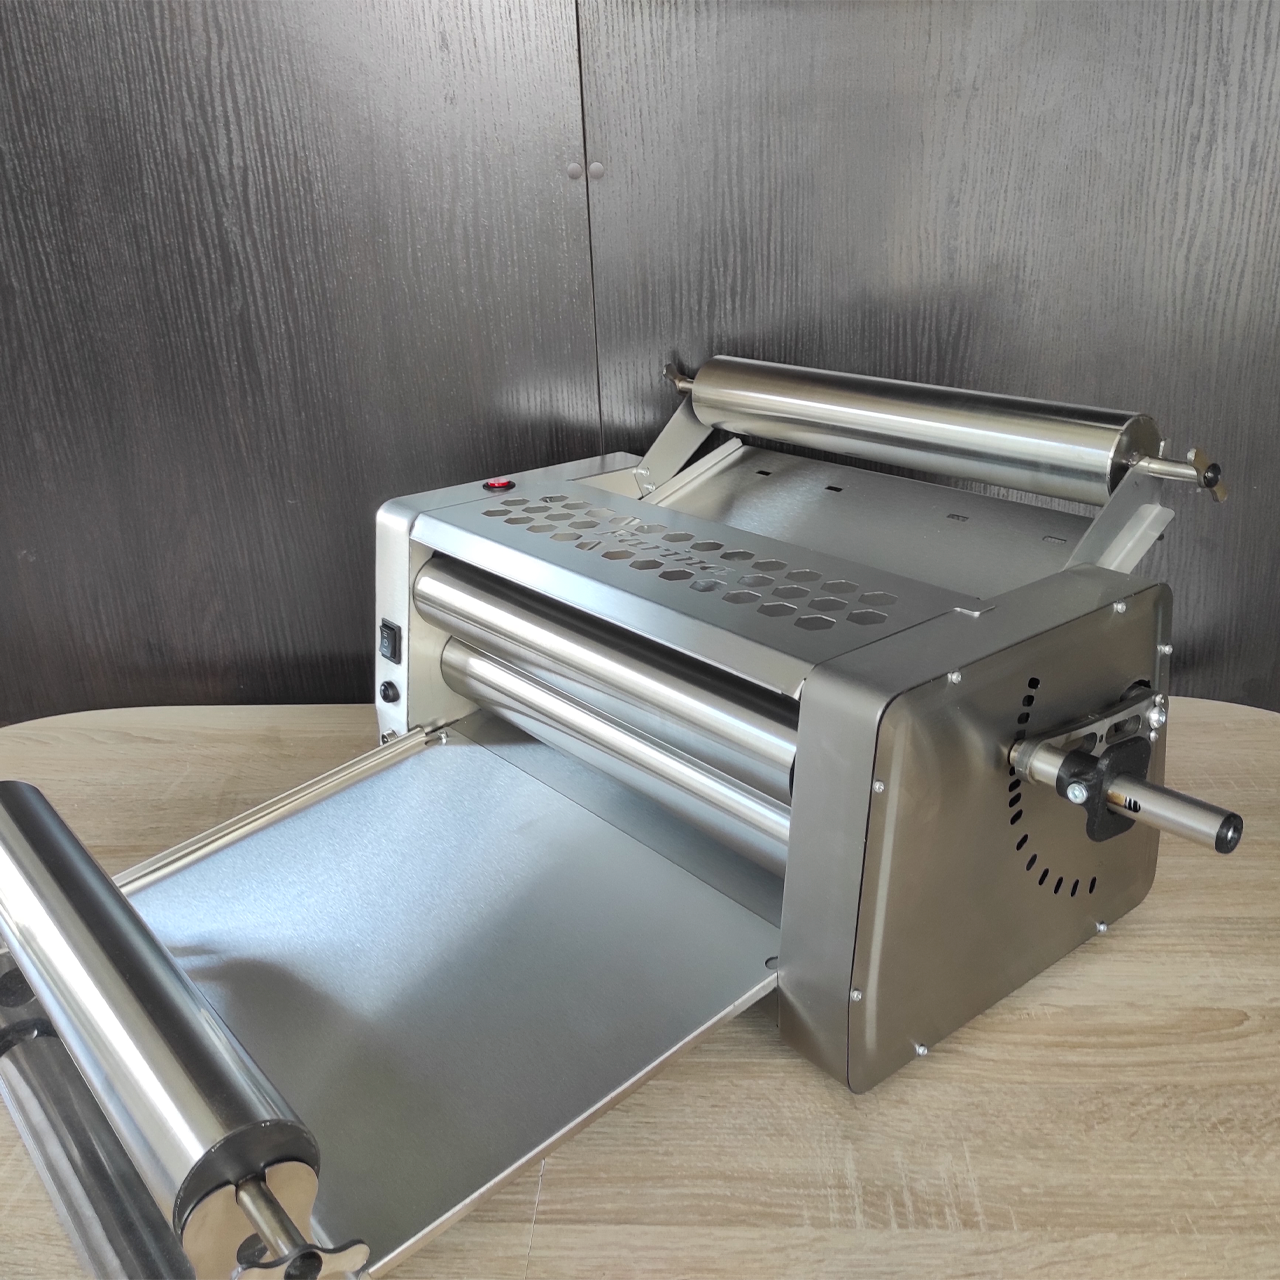 Electric Dough Sheeter for Home Use and Cafe Dough Roller 